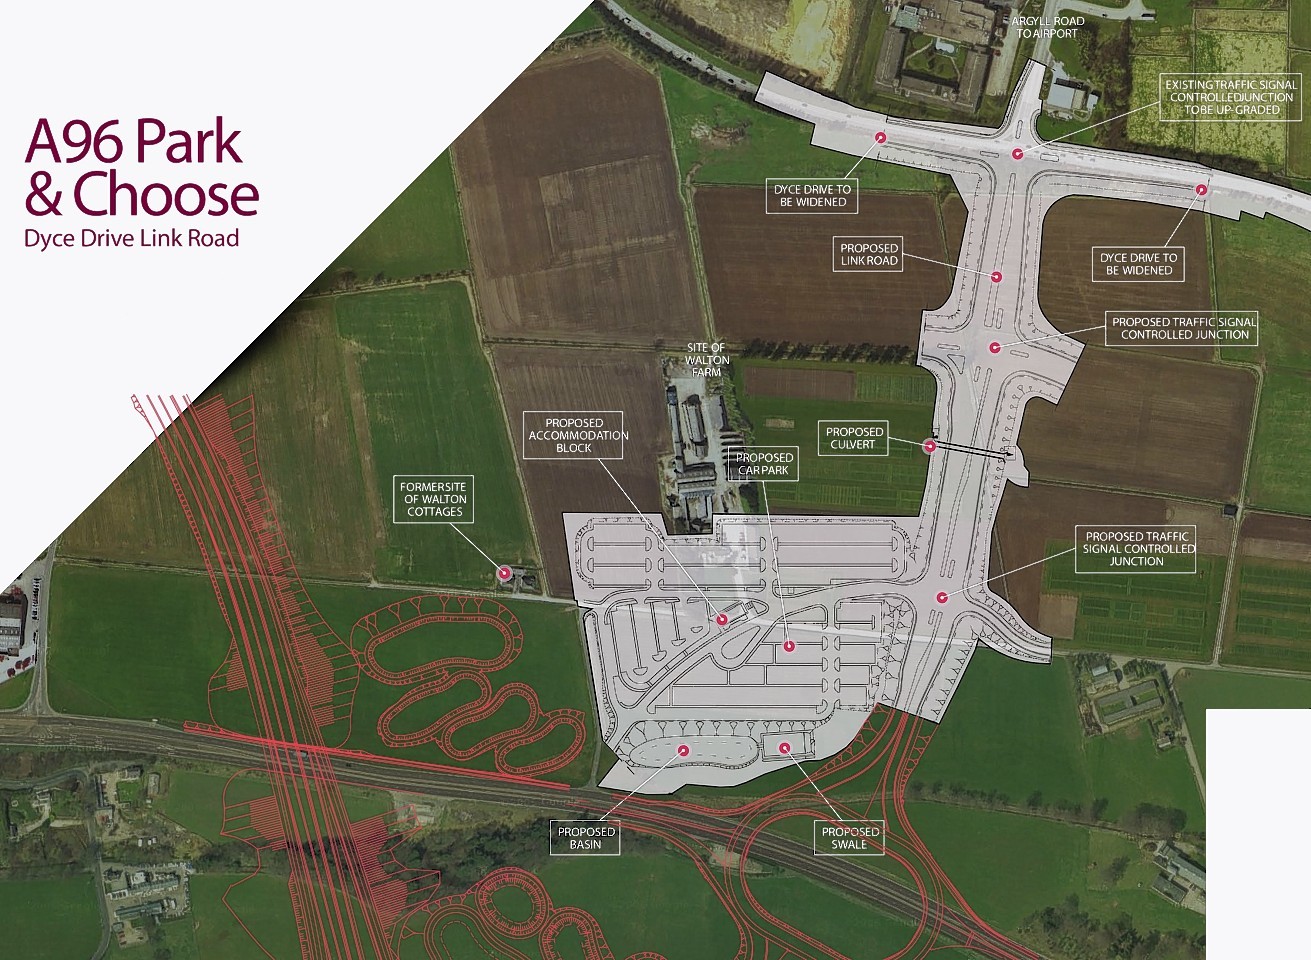 Plans for the new A96 park and ride